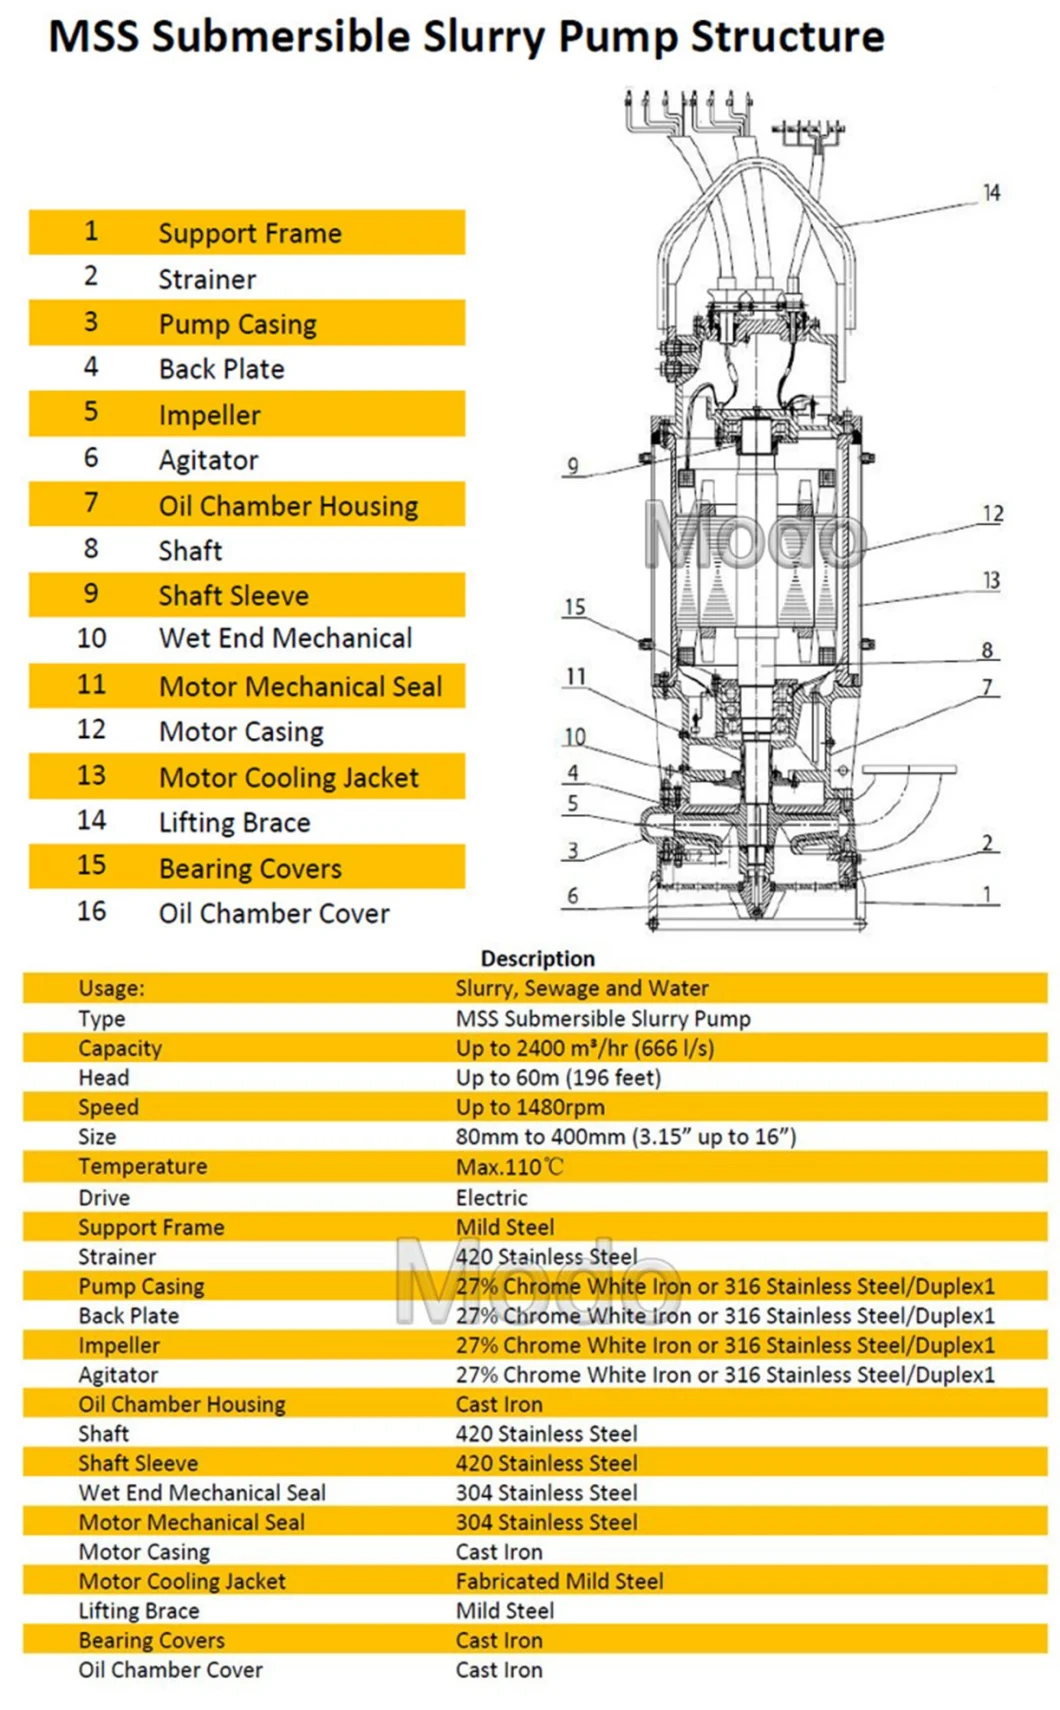 The Best High Quality Underwater High Chrome A05 Submersible Sewage Slurry Pump for Civil Construction